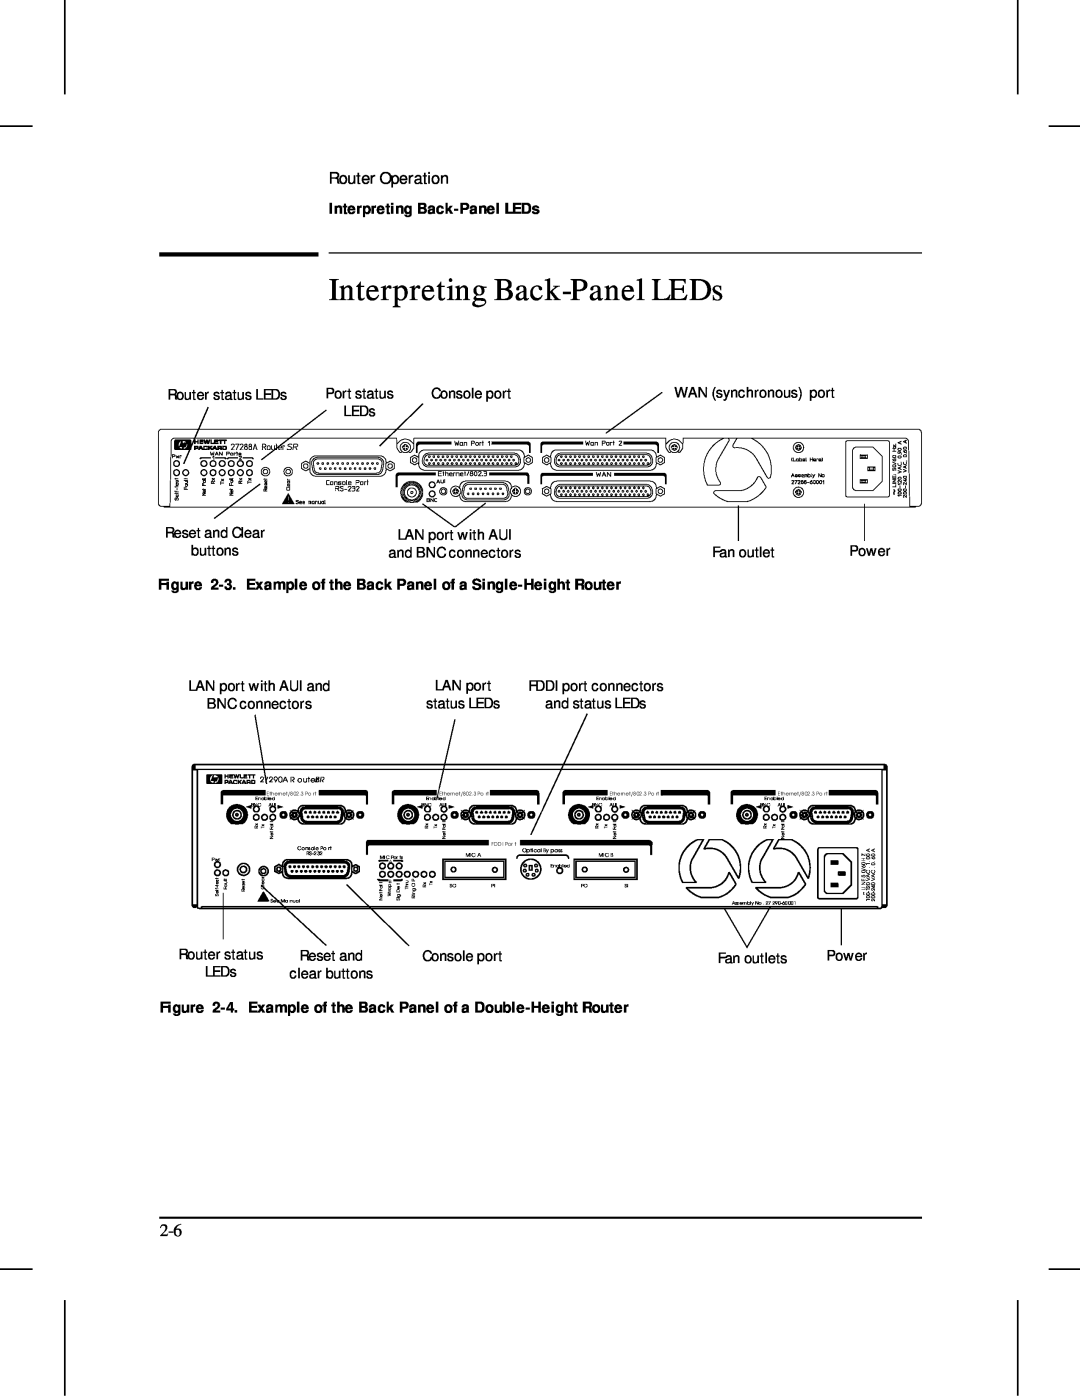 HP 480 manual Interpreting Back-Panel LEDs, Router Operation, 3. Example of the Back Panel of a Single-Height Router, Power 